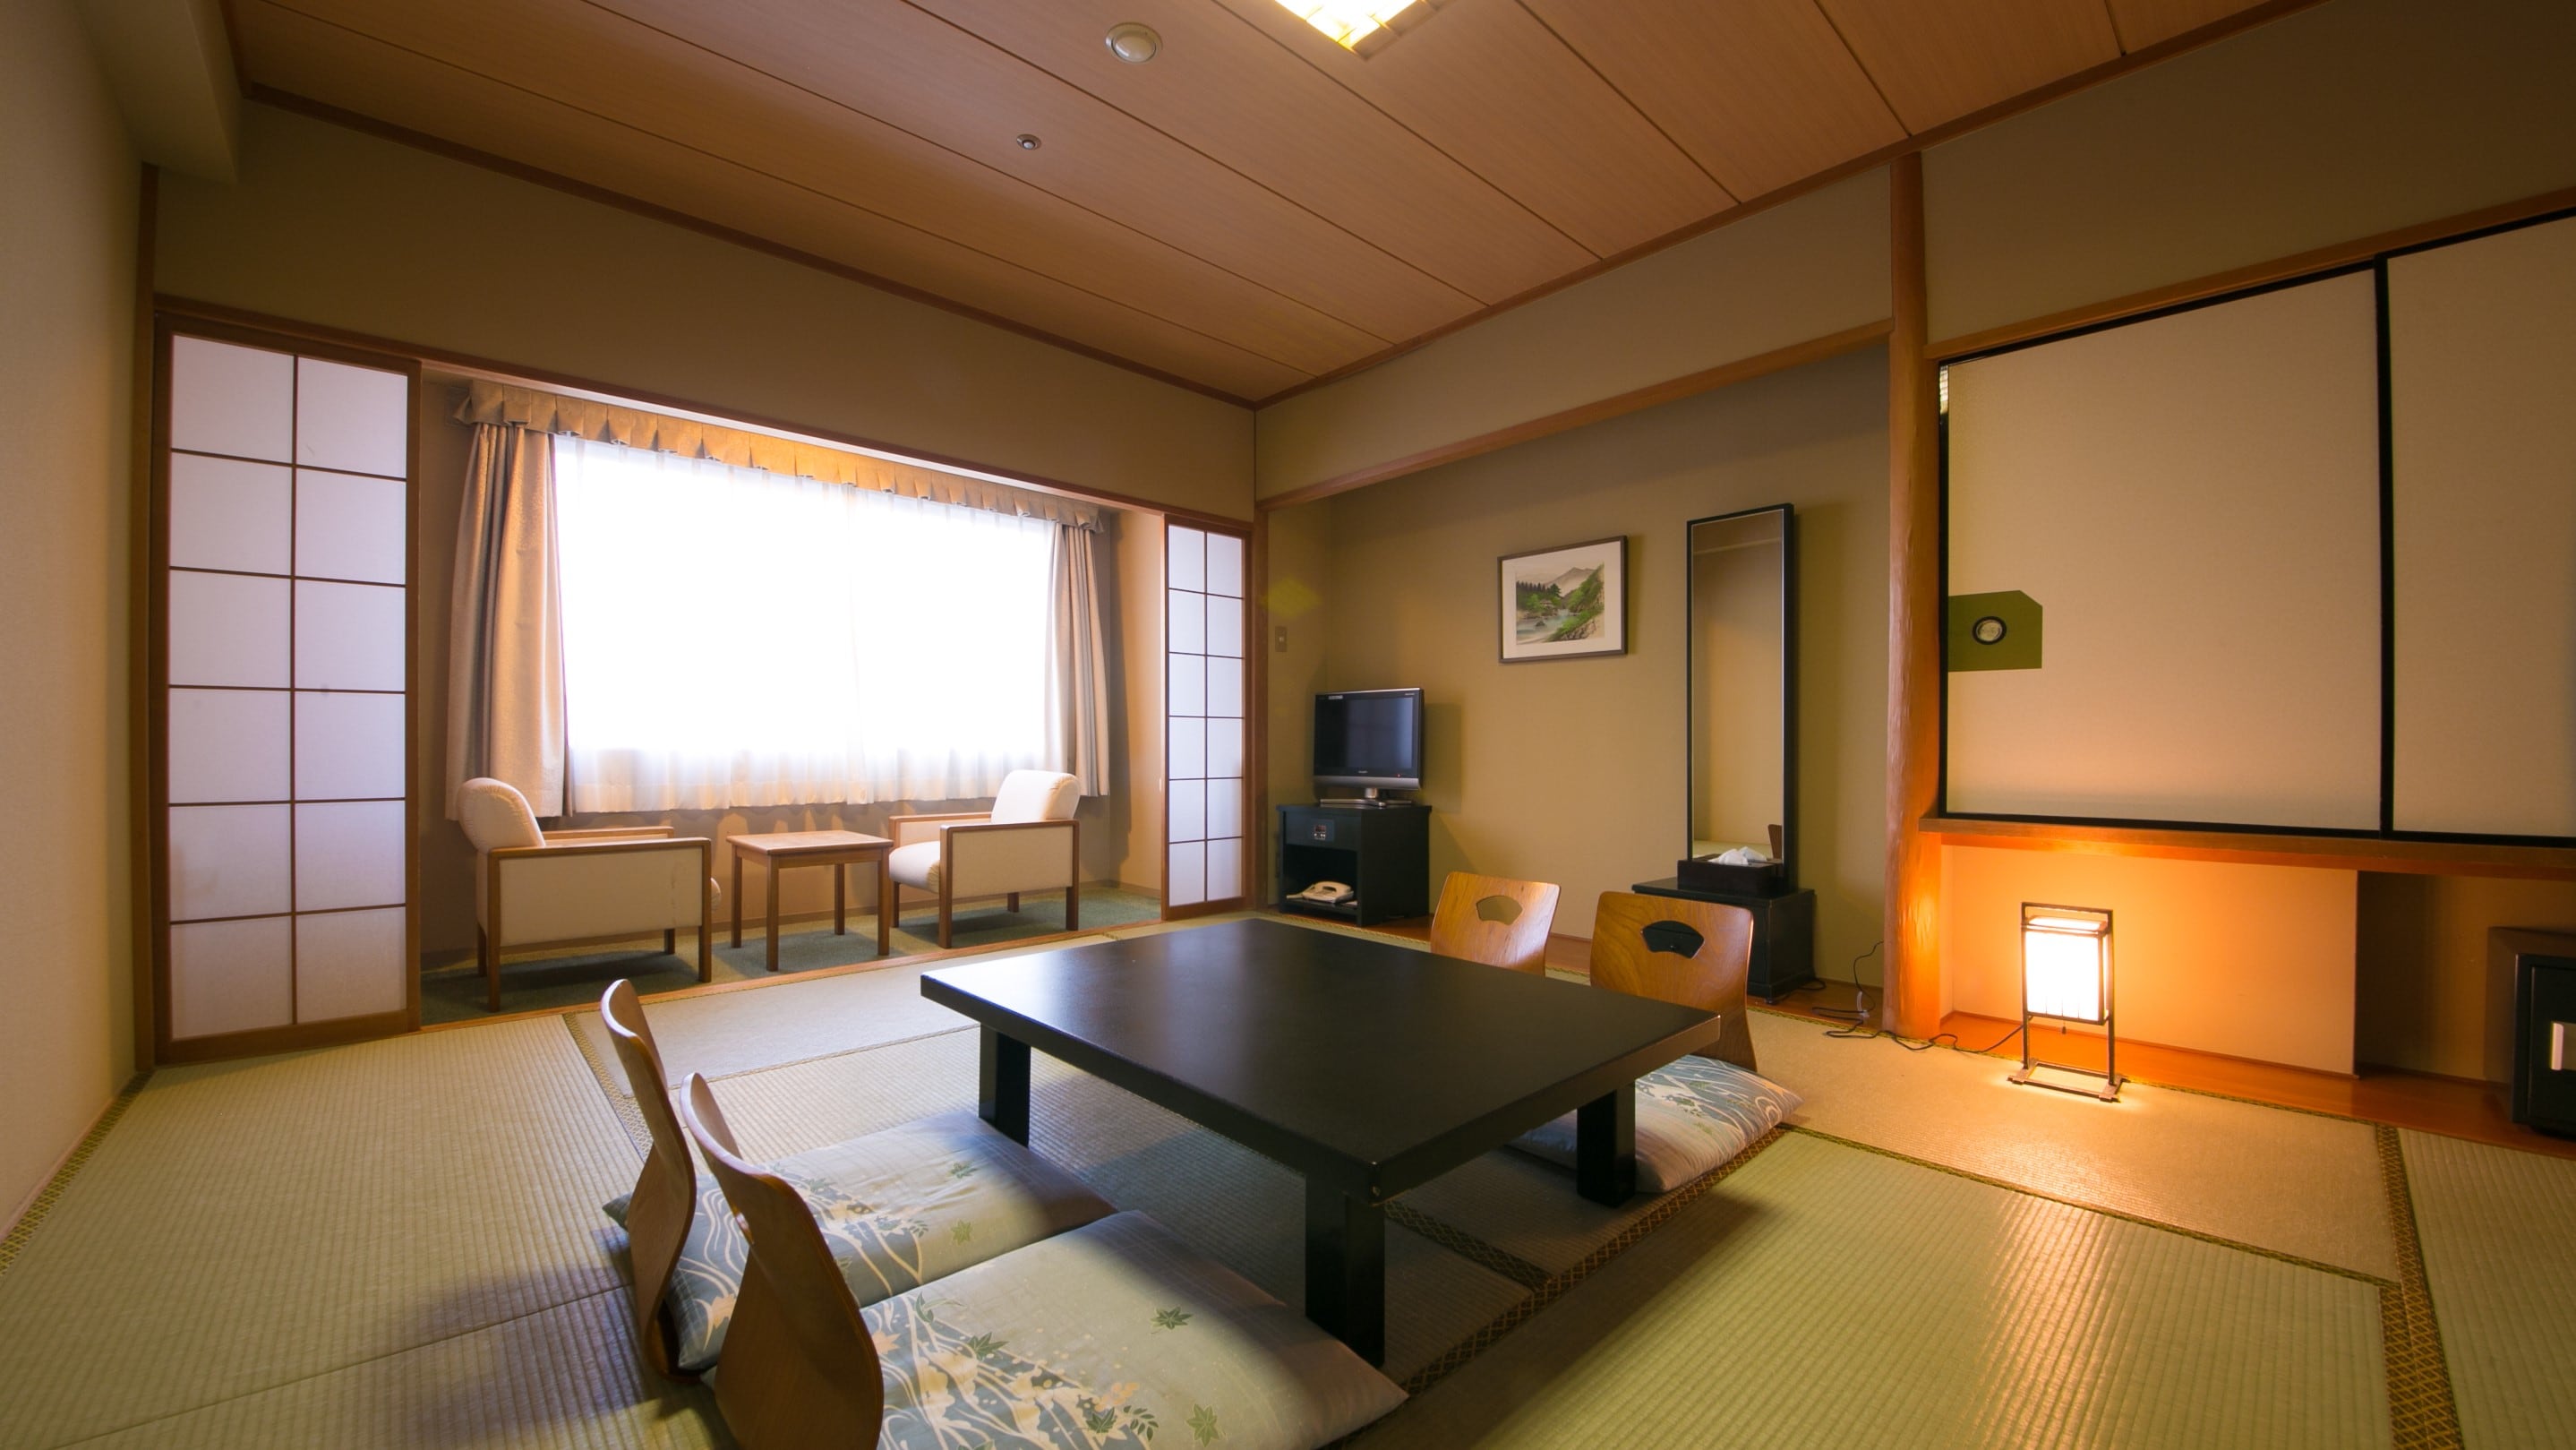 [Non-smoking] Non-smoking Japanese-style room with 10 tatami mats [Reliable even with small children]